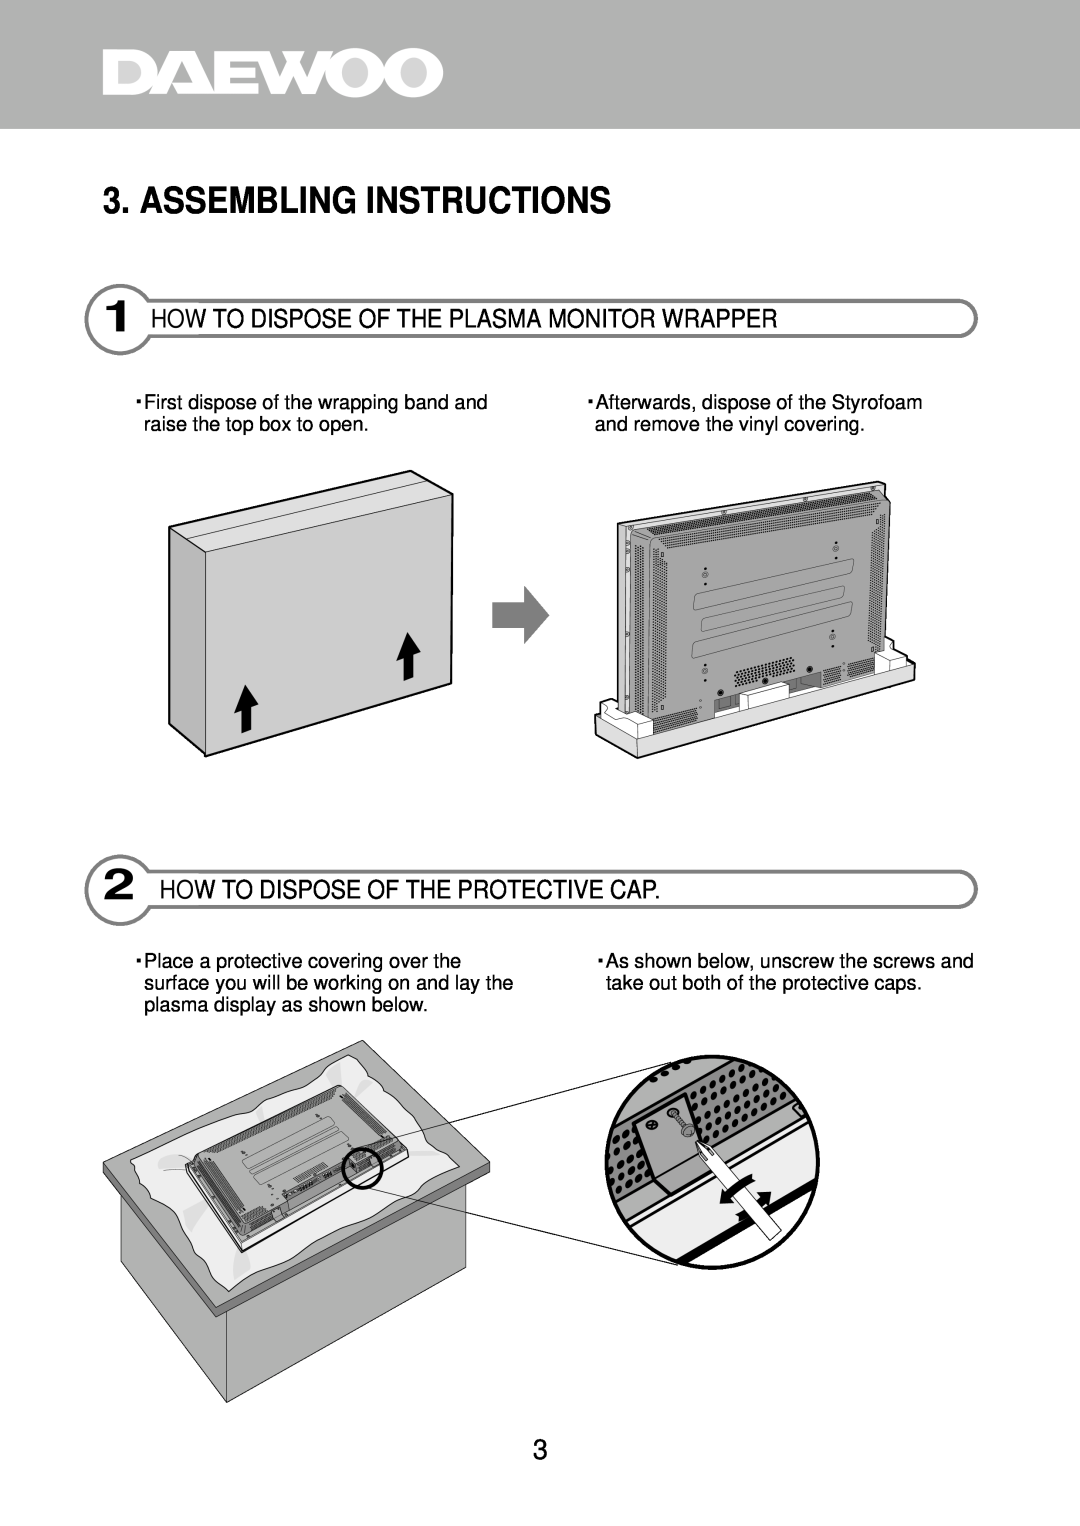 Daewoo DP-ST20 Assembling Instructions, How To Dispose Of The Plasma Monitor Wrapper, How To Dispose Of The Protective Cap 